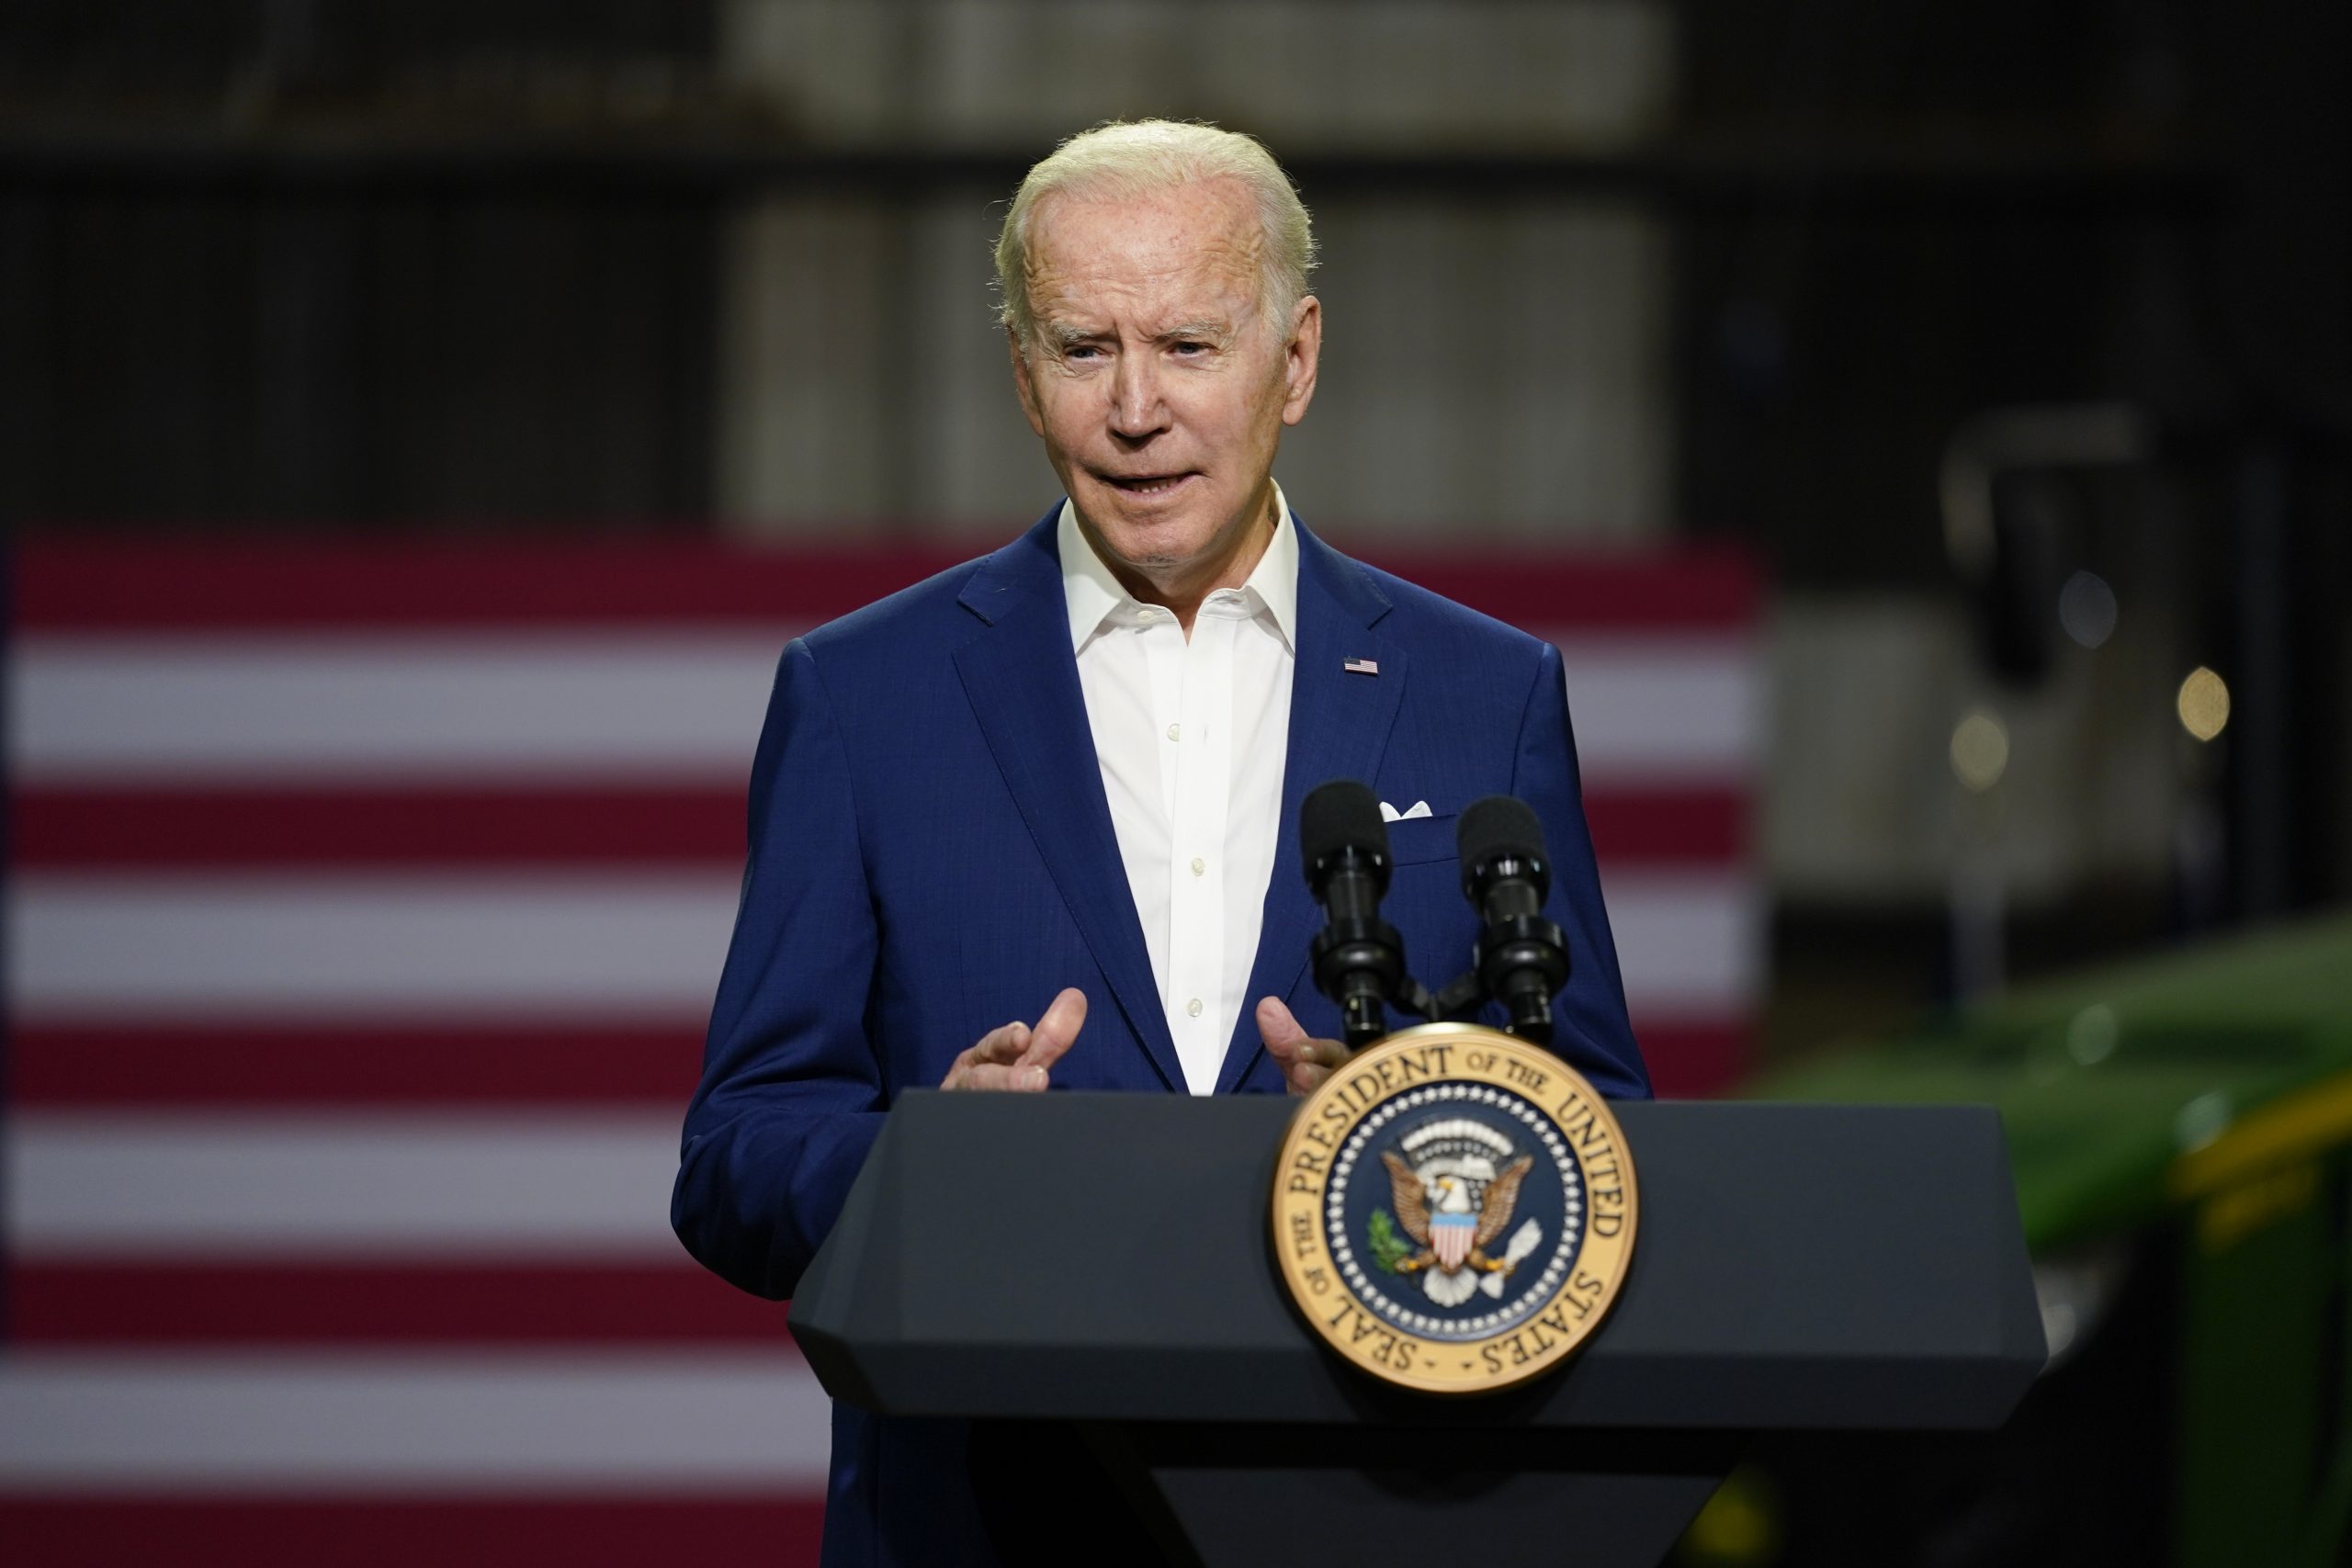 Biden’s shift from climate to oil rattles greens